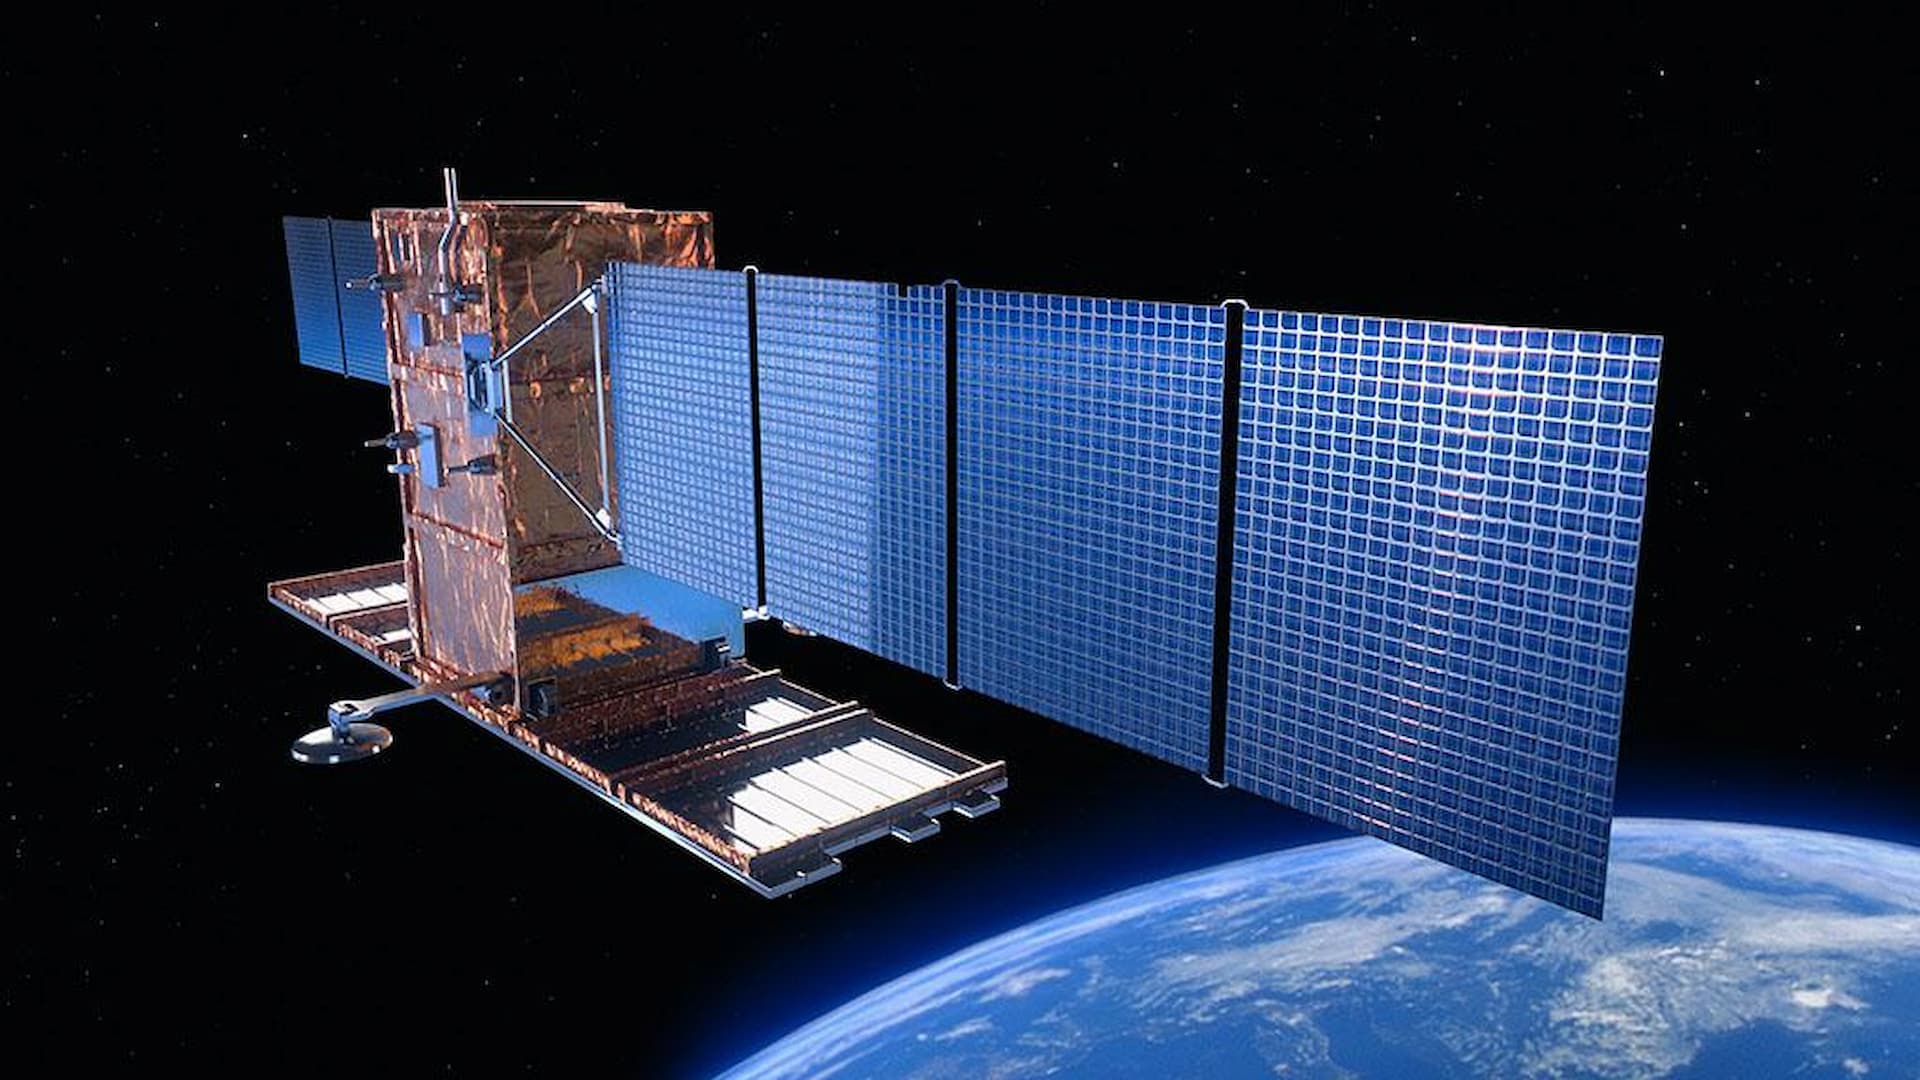 ASI - The second COSMO-SkyMed Second Generation (CSG) satellite becomes operational and strengthens even more the established role and contribution of Italy in the field of Earth observation